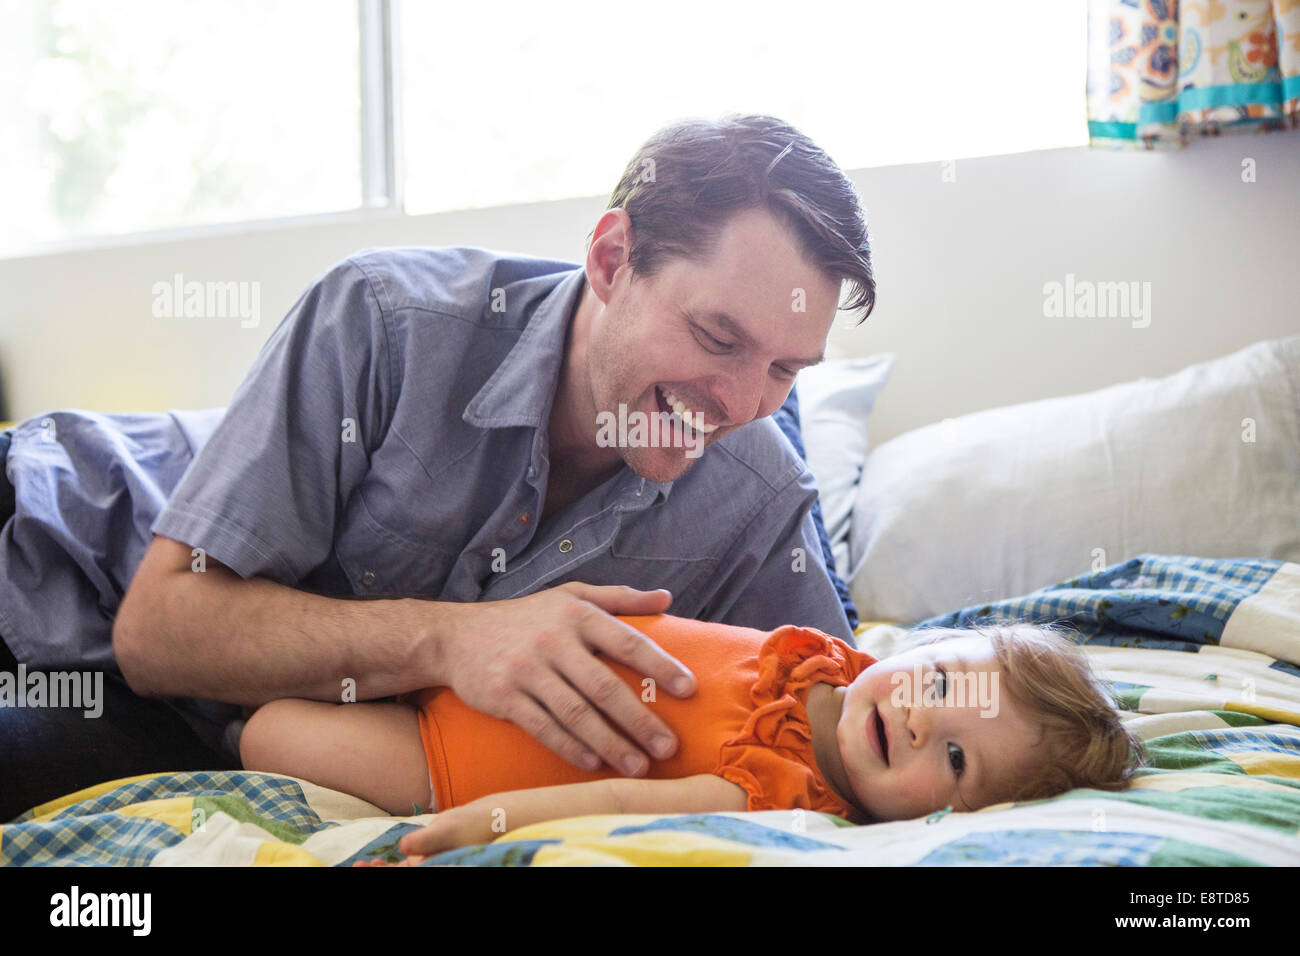 Young Girl Playing with daughter on bed Banque D'Images